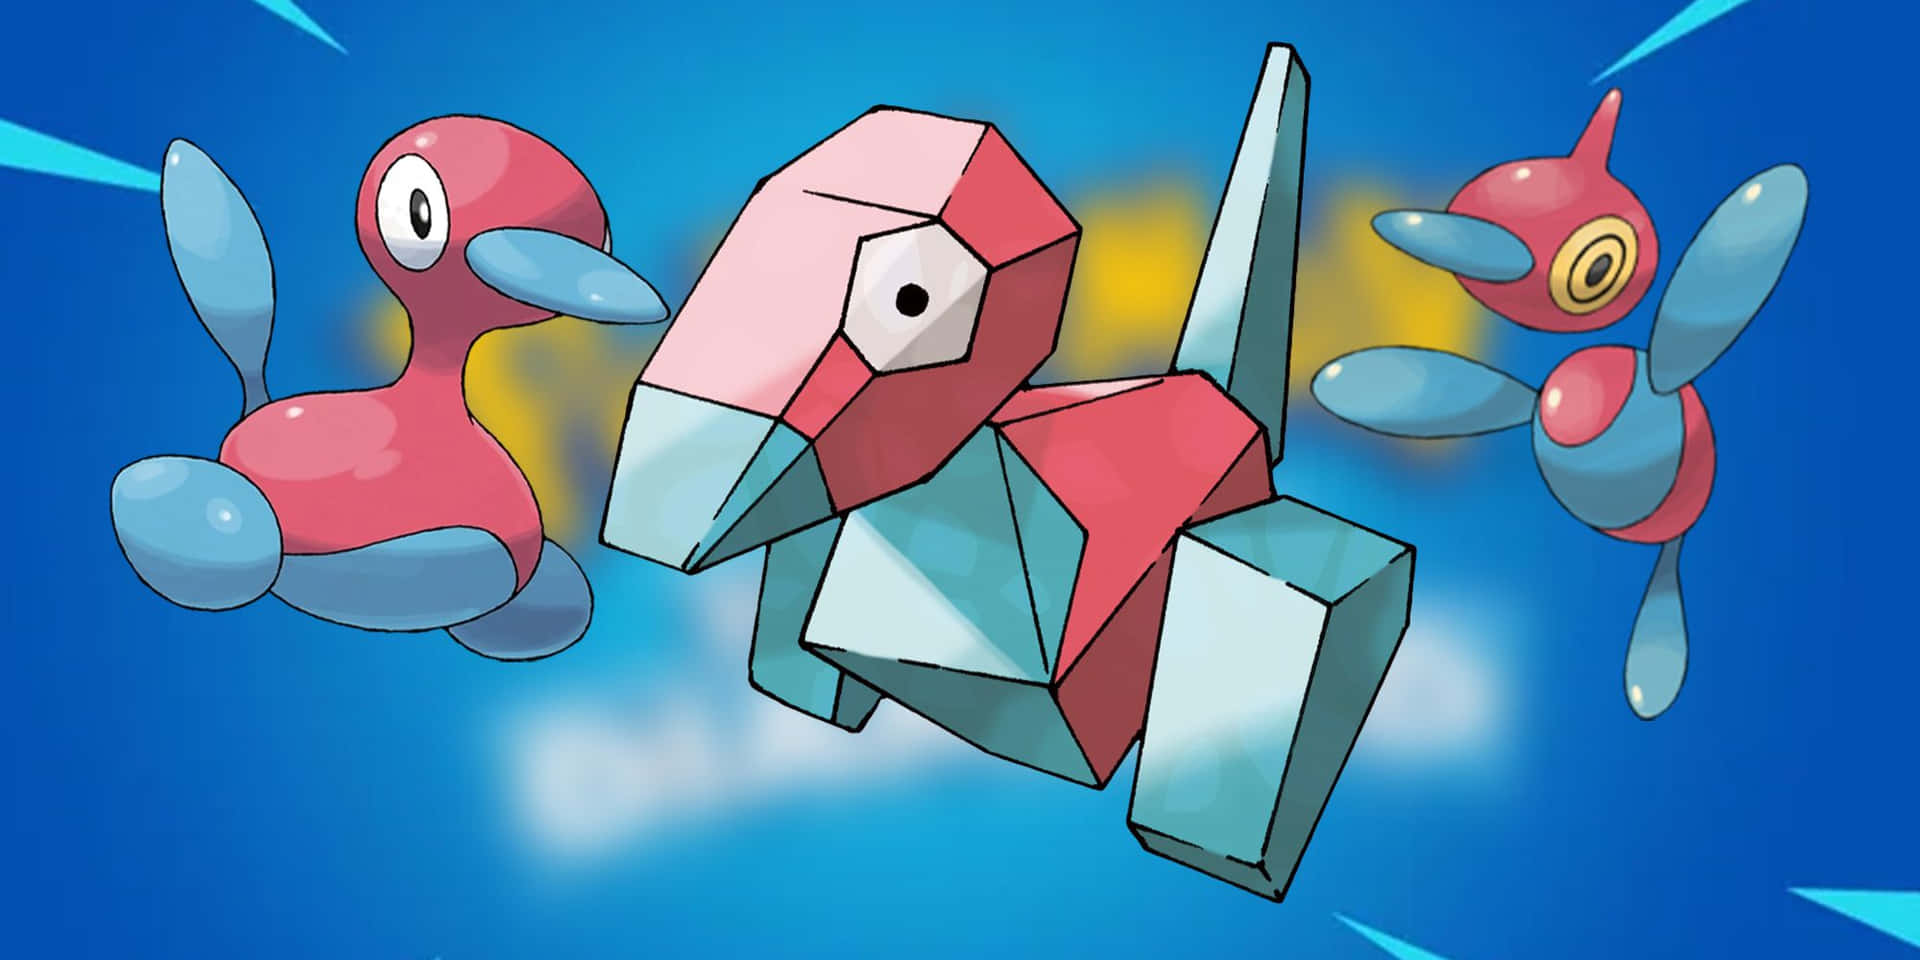 Evolutionary Interaction of Porygon2 with Porygon and Porygon-Z in High Definition Wallpaper